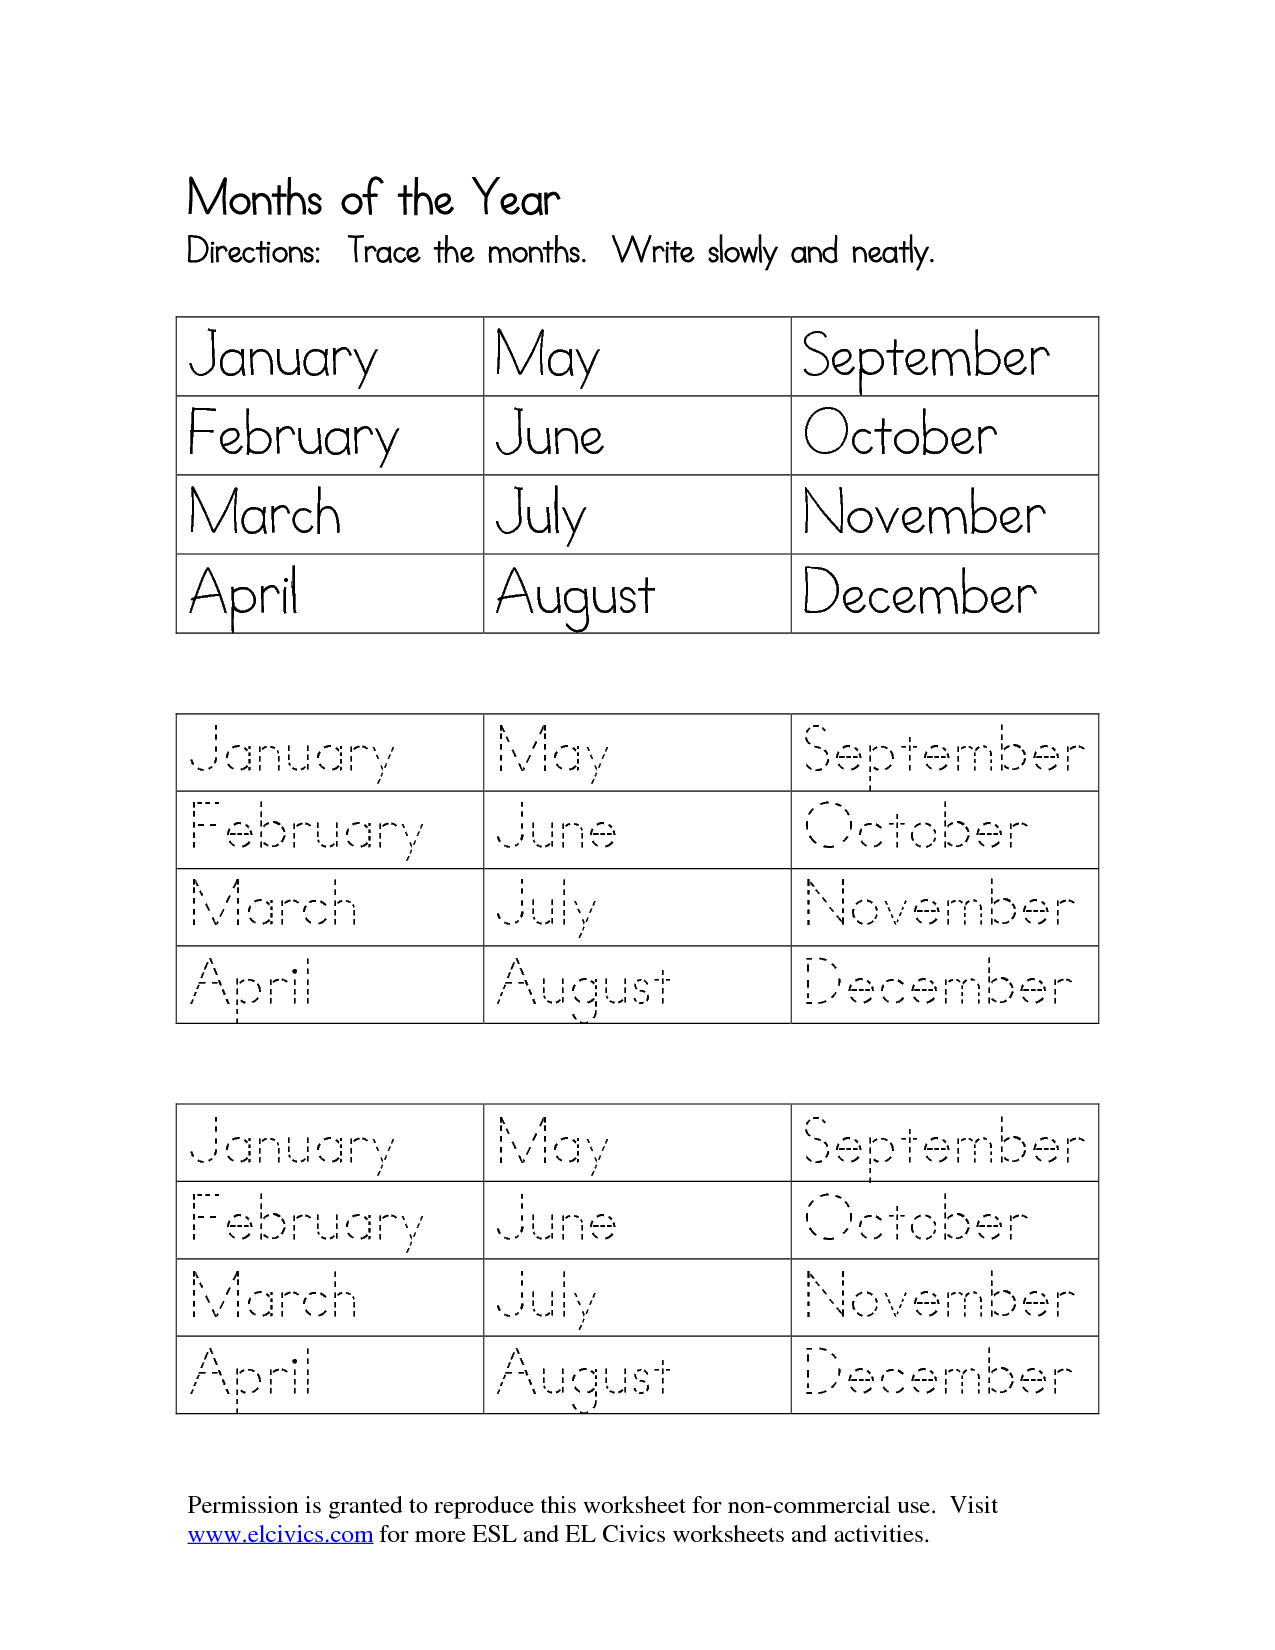 9-best-images-of-months-of-the-year-handwriting-worksheet-spring-handwriting-worksheet-order